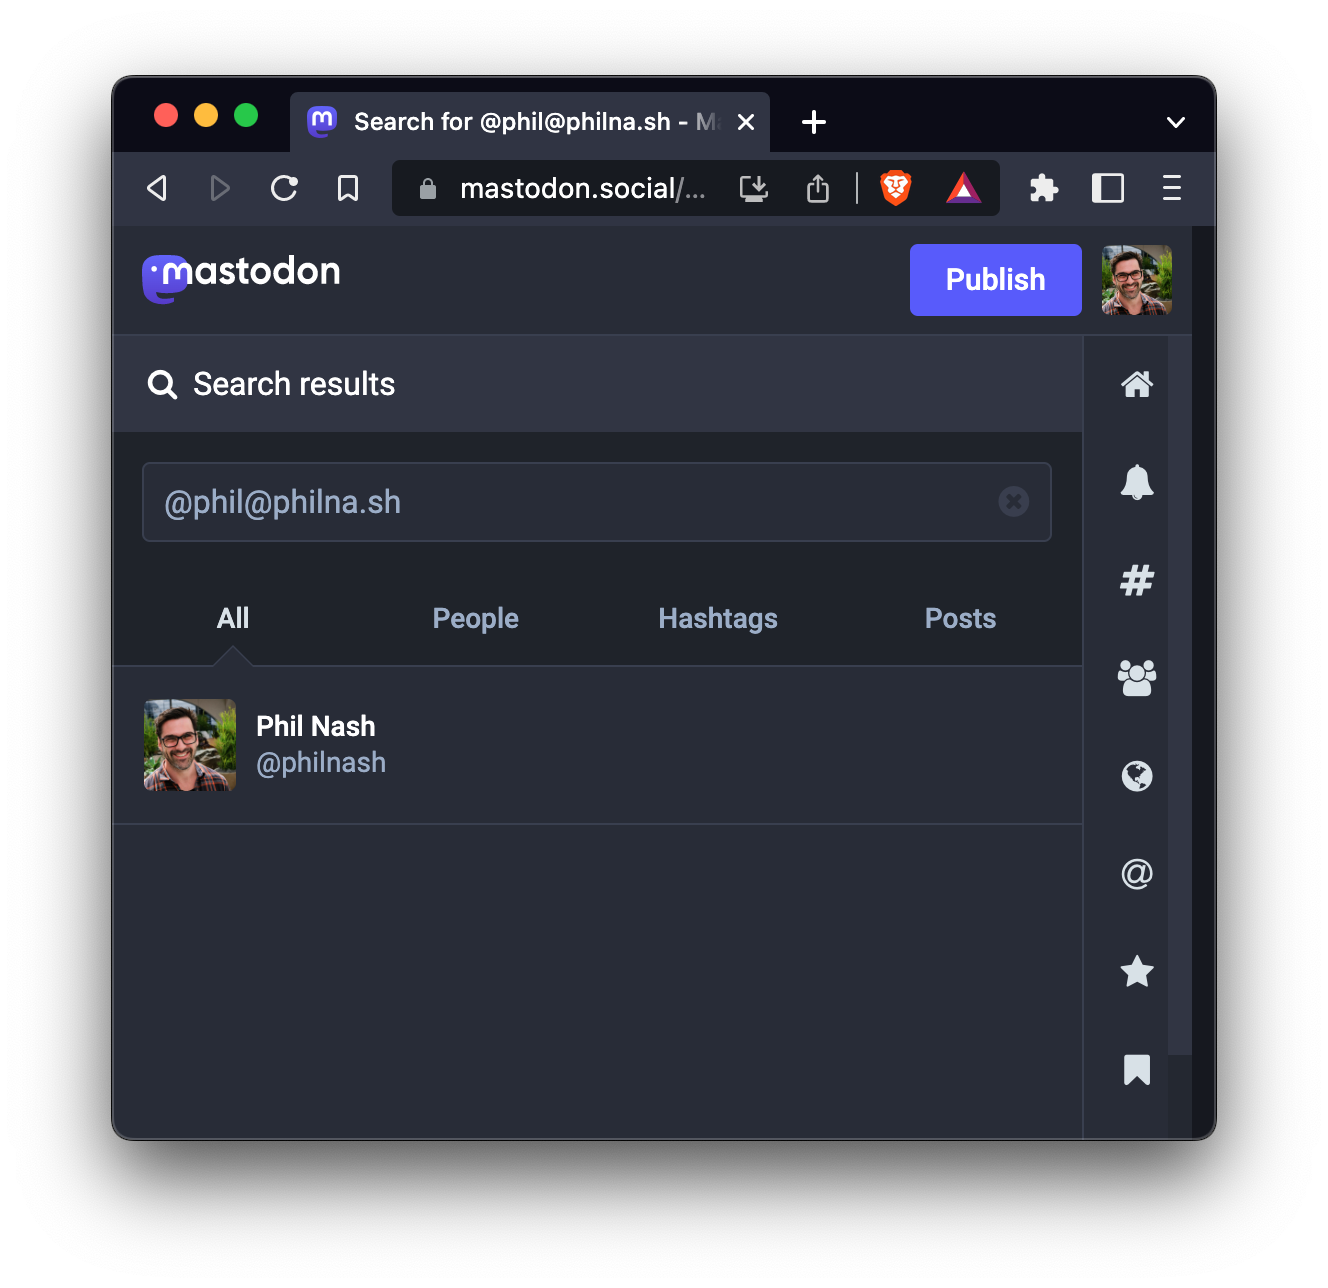 When you search for @phil@philna.sh on your Mastodon instance, you will find my account